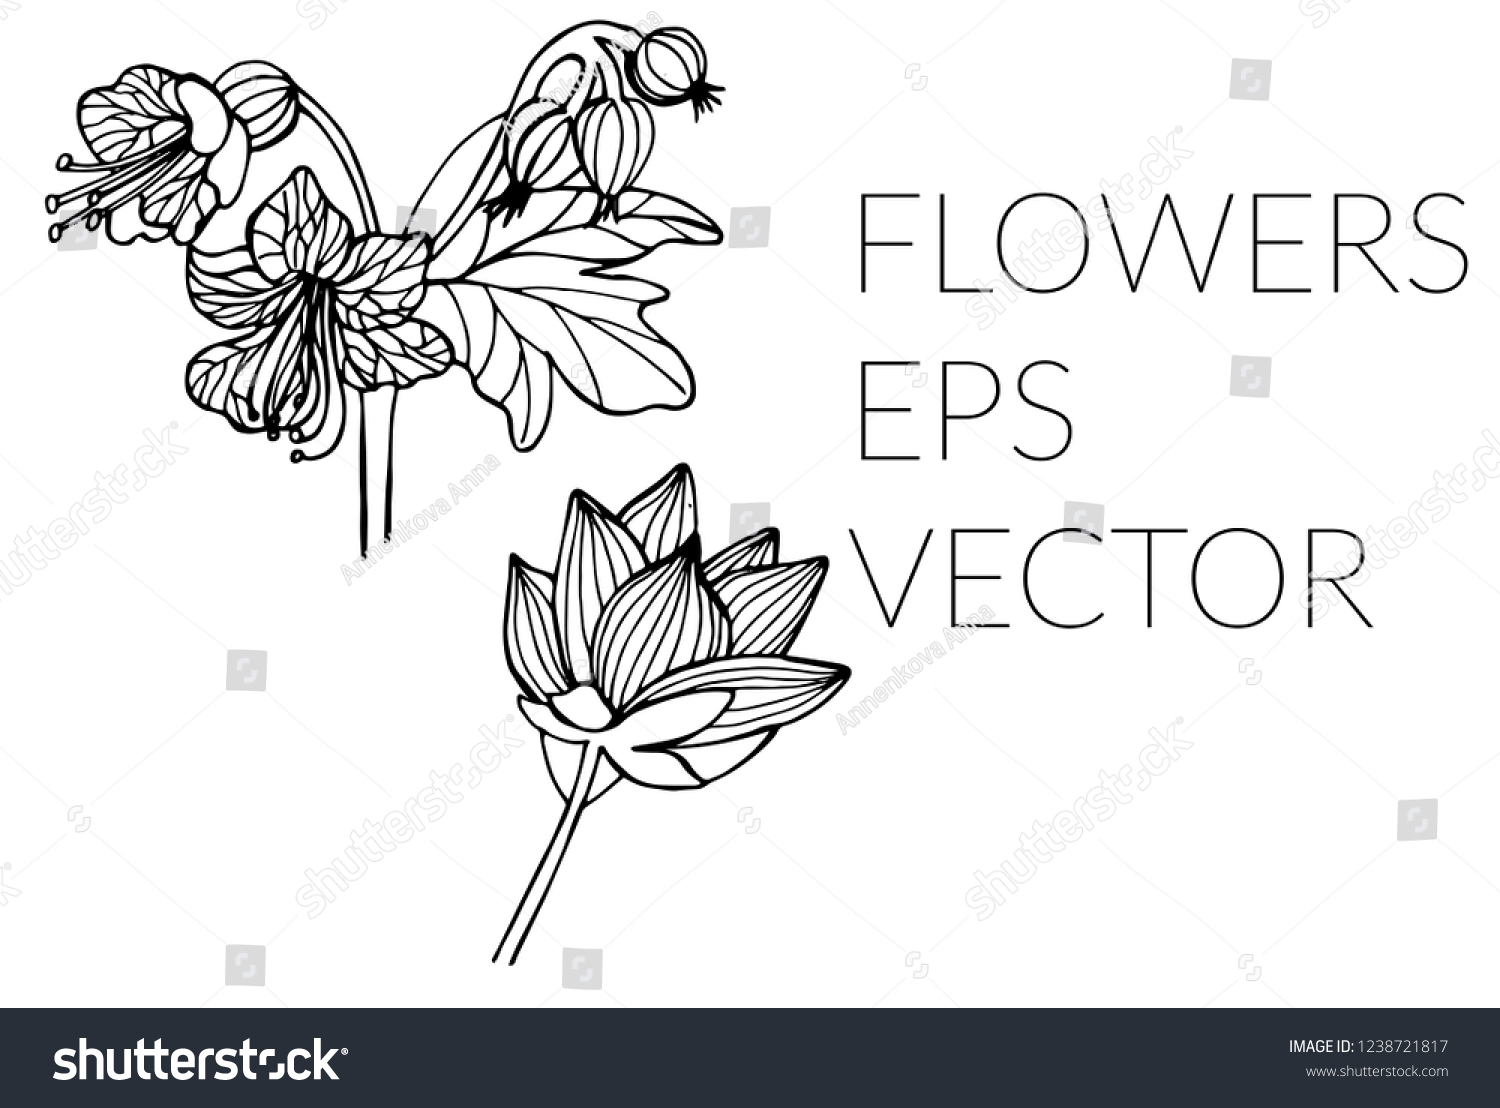 Featured image of post Flower Sketch Design For Project / Download this flower motif for design vector illustration now.